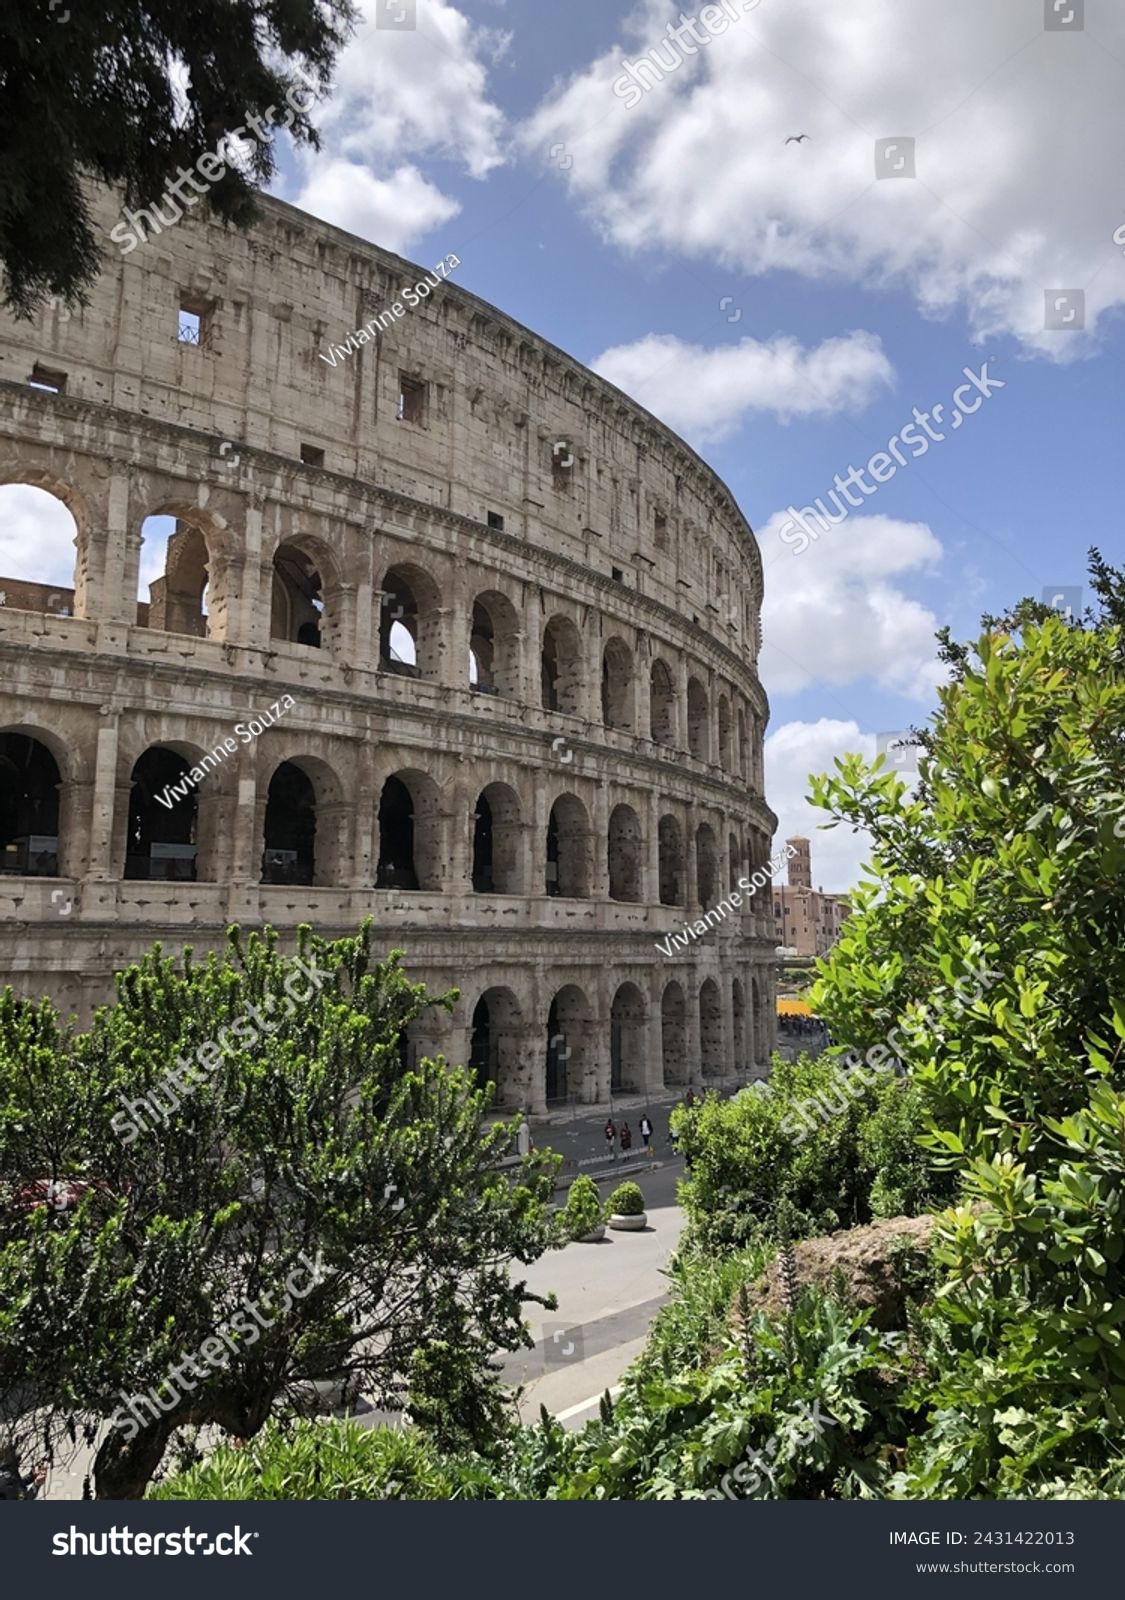 The coliseum in Rome - Italy #2431422013